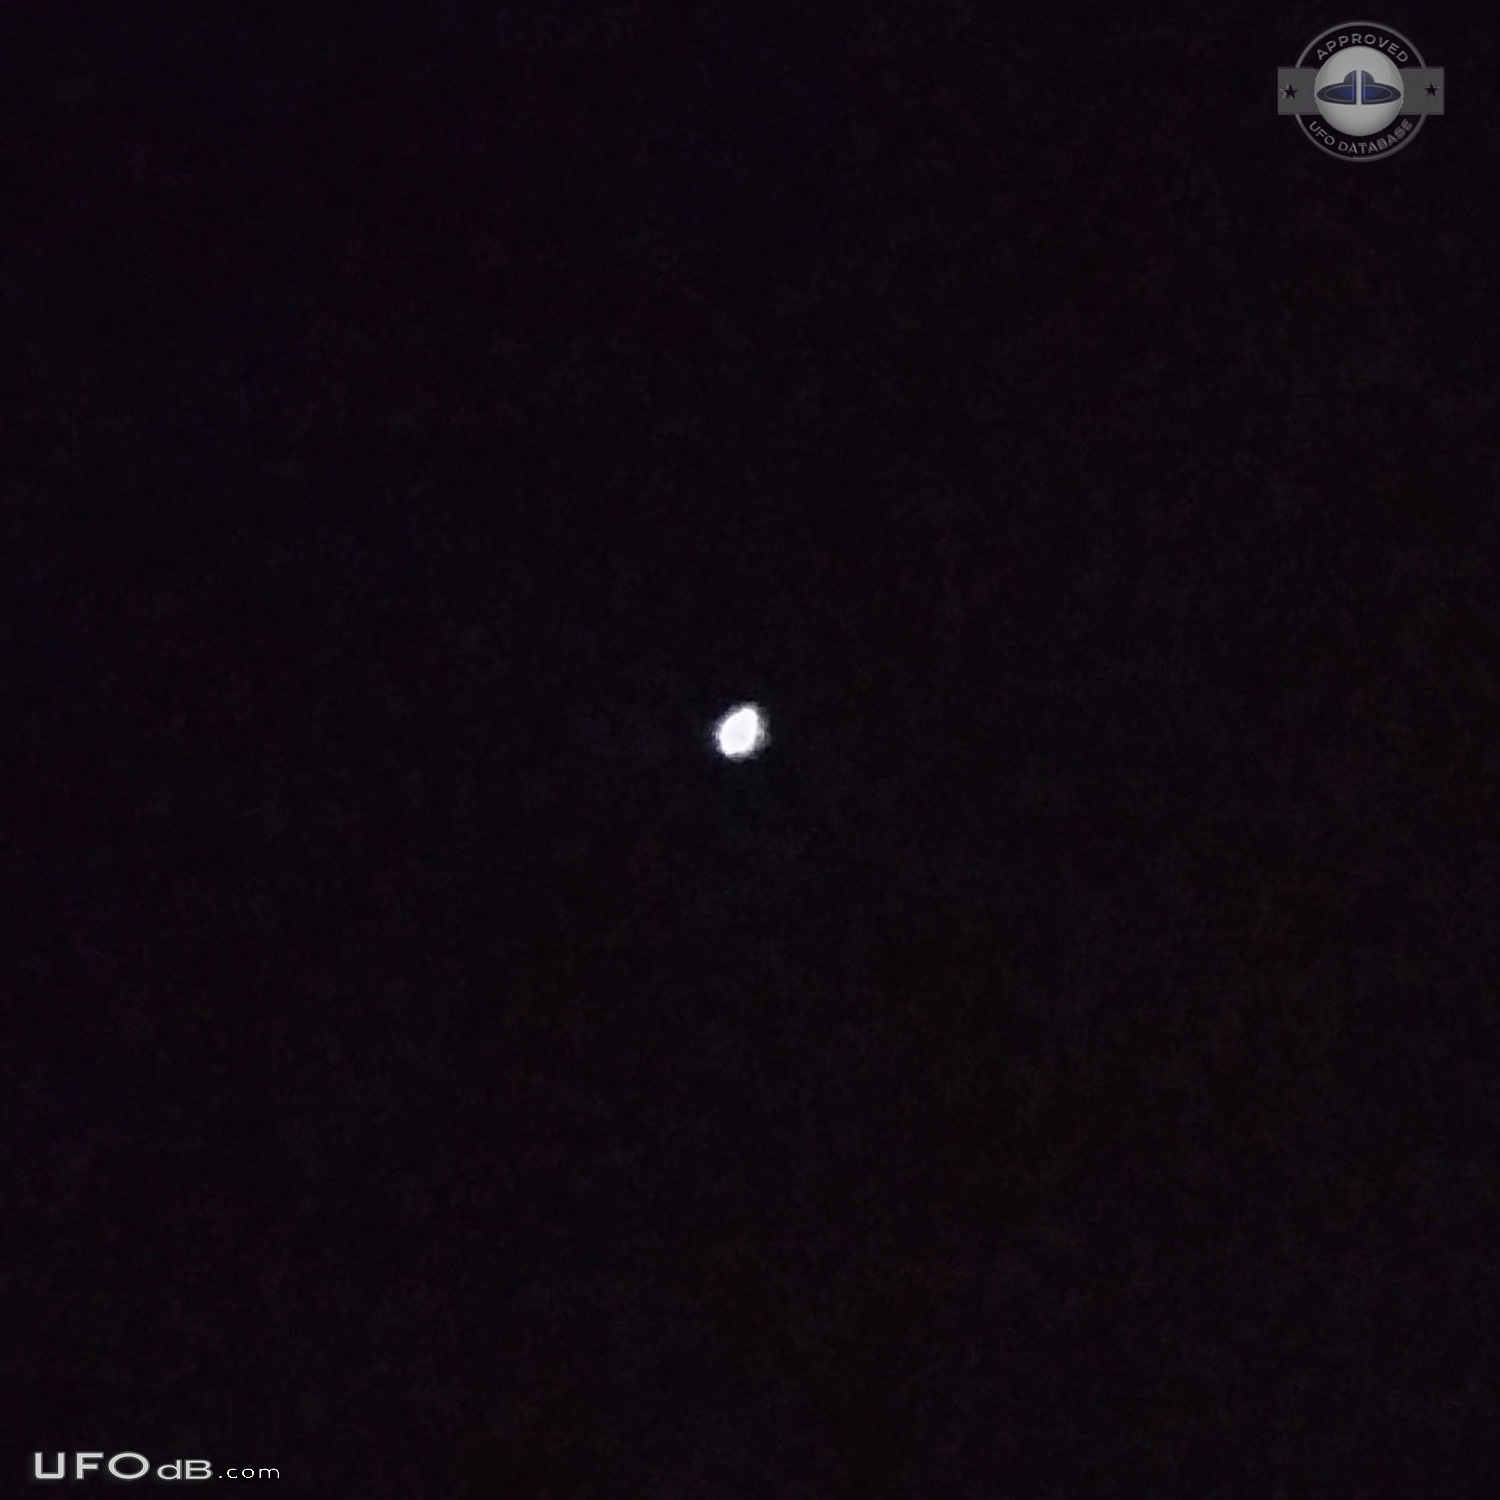 Seen from distance unmoving much larger other stars - Gatineau Quebec  UFO Picture #767-3